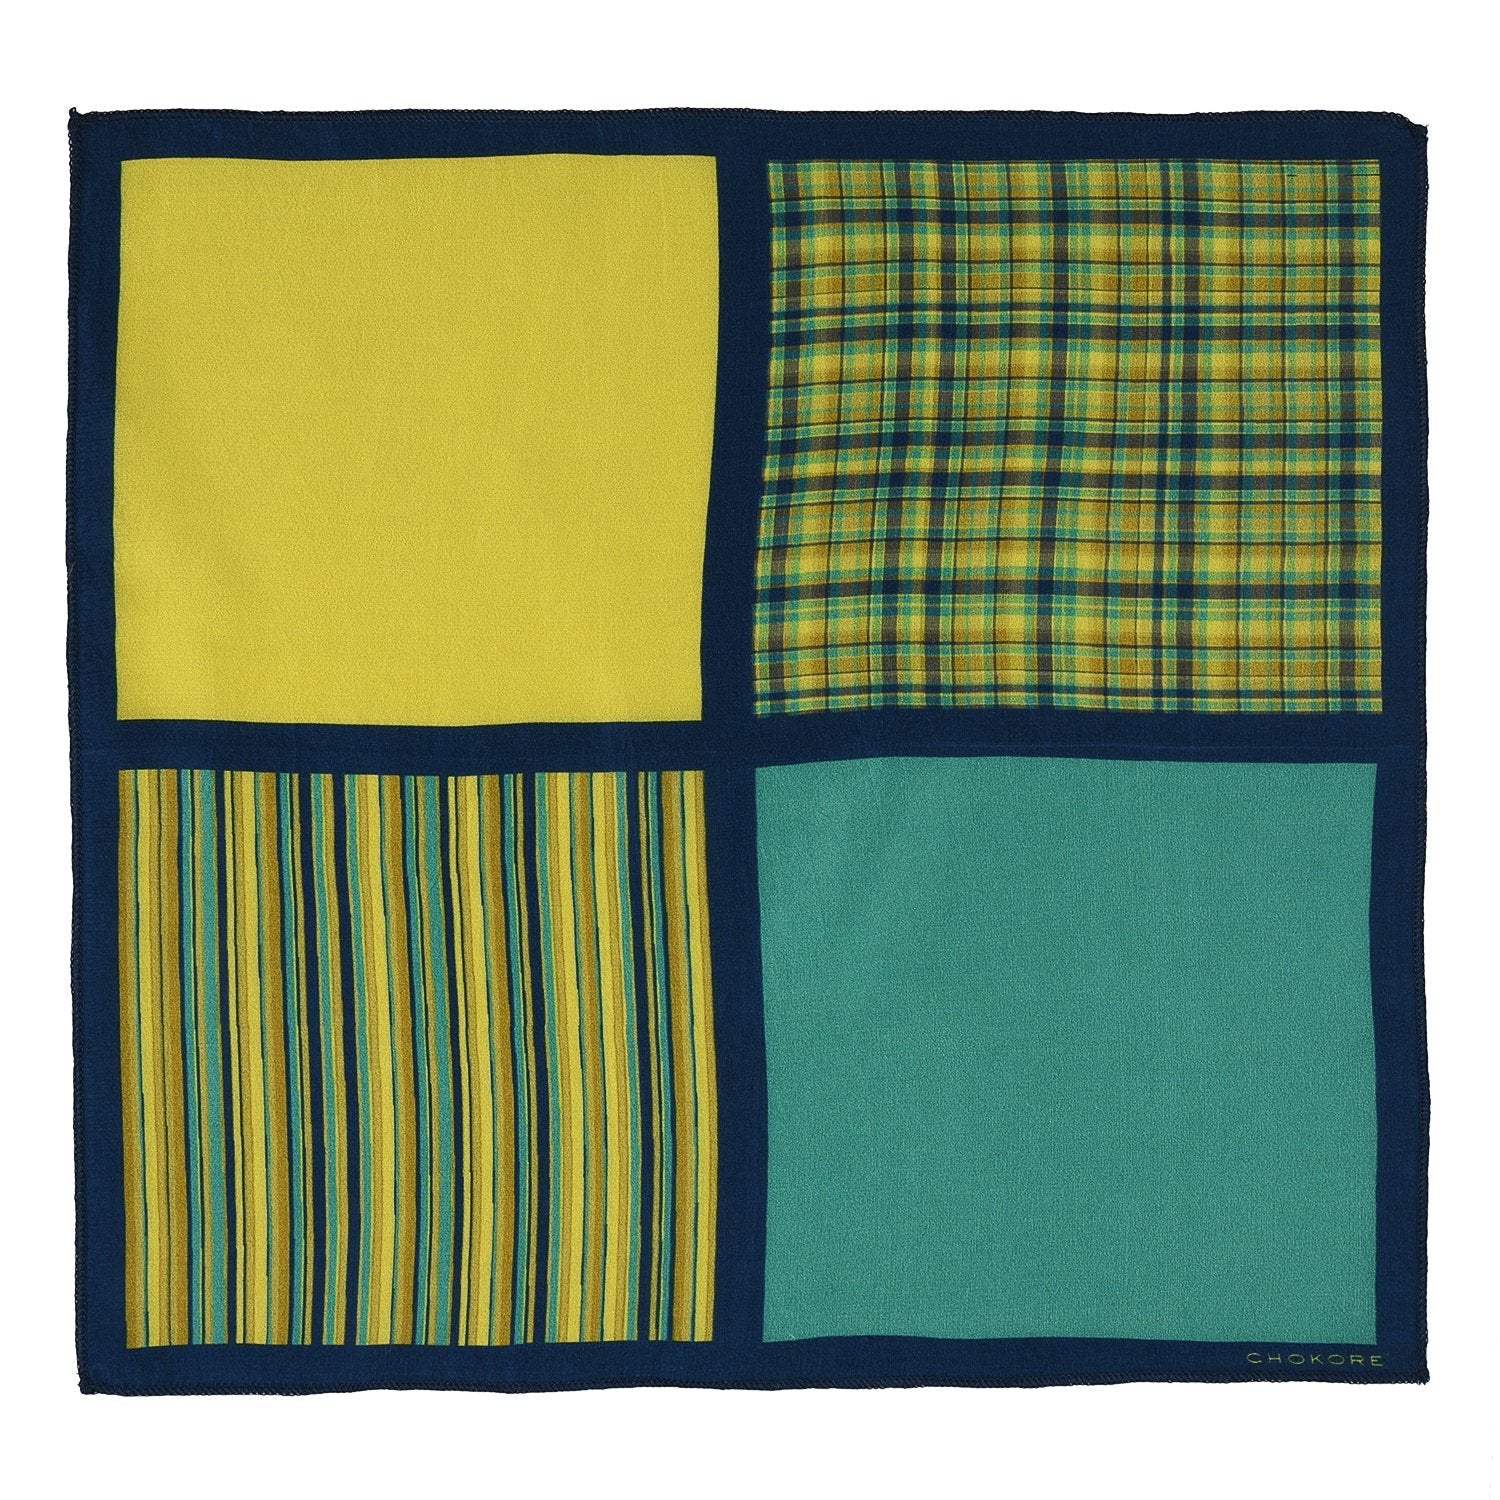 Chokore Four-in-One Shades of Green & Yellow Silk Pocket Square from the Plaids Line